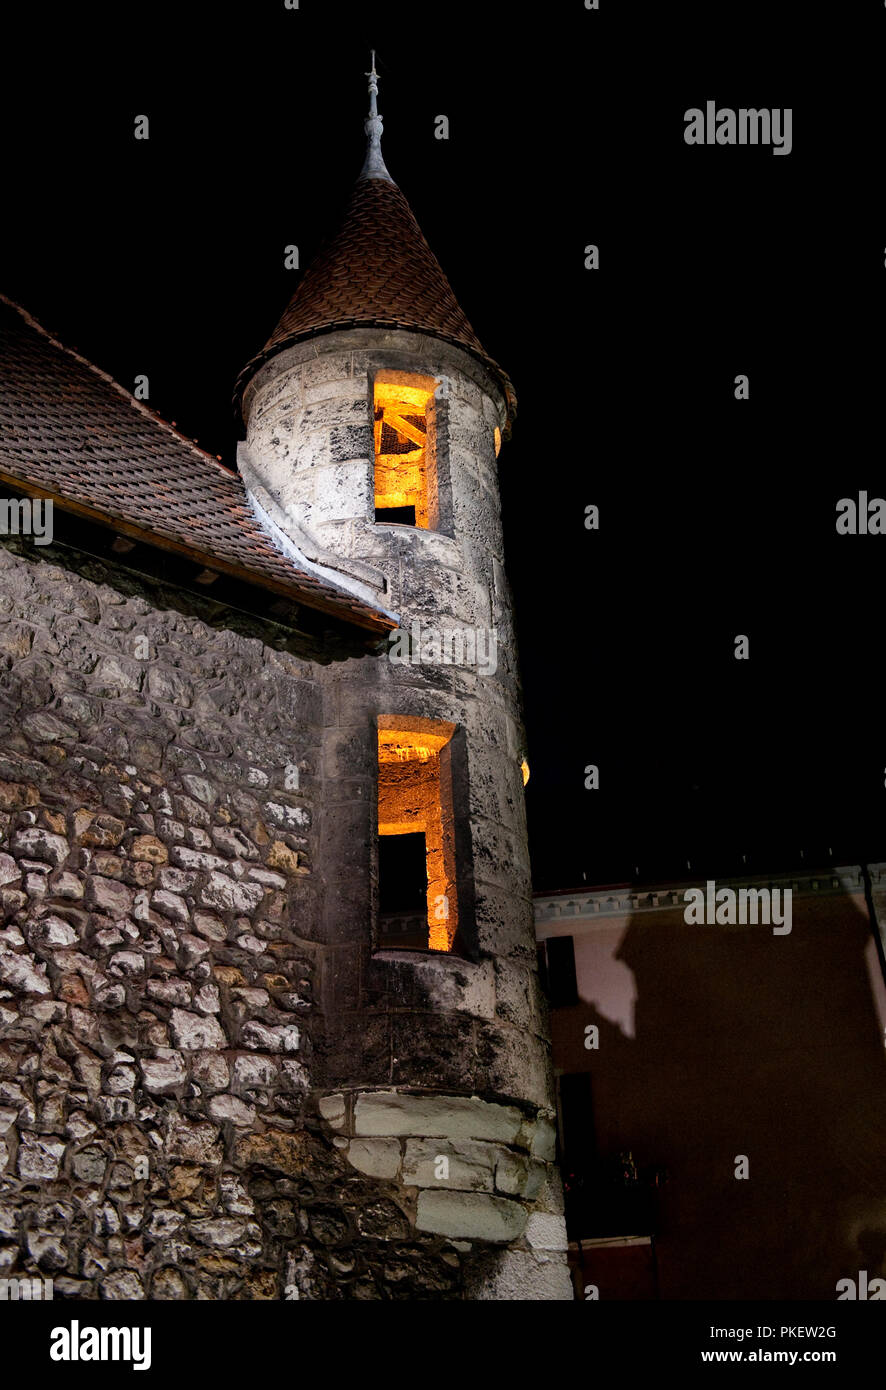 Night view of the 12th century Palais de l'Isle jail in Annecy, capital of the Haute-Savoie department (France, 21/06/2010) Stock Photo